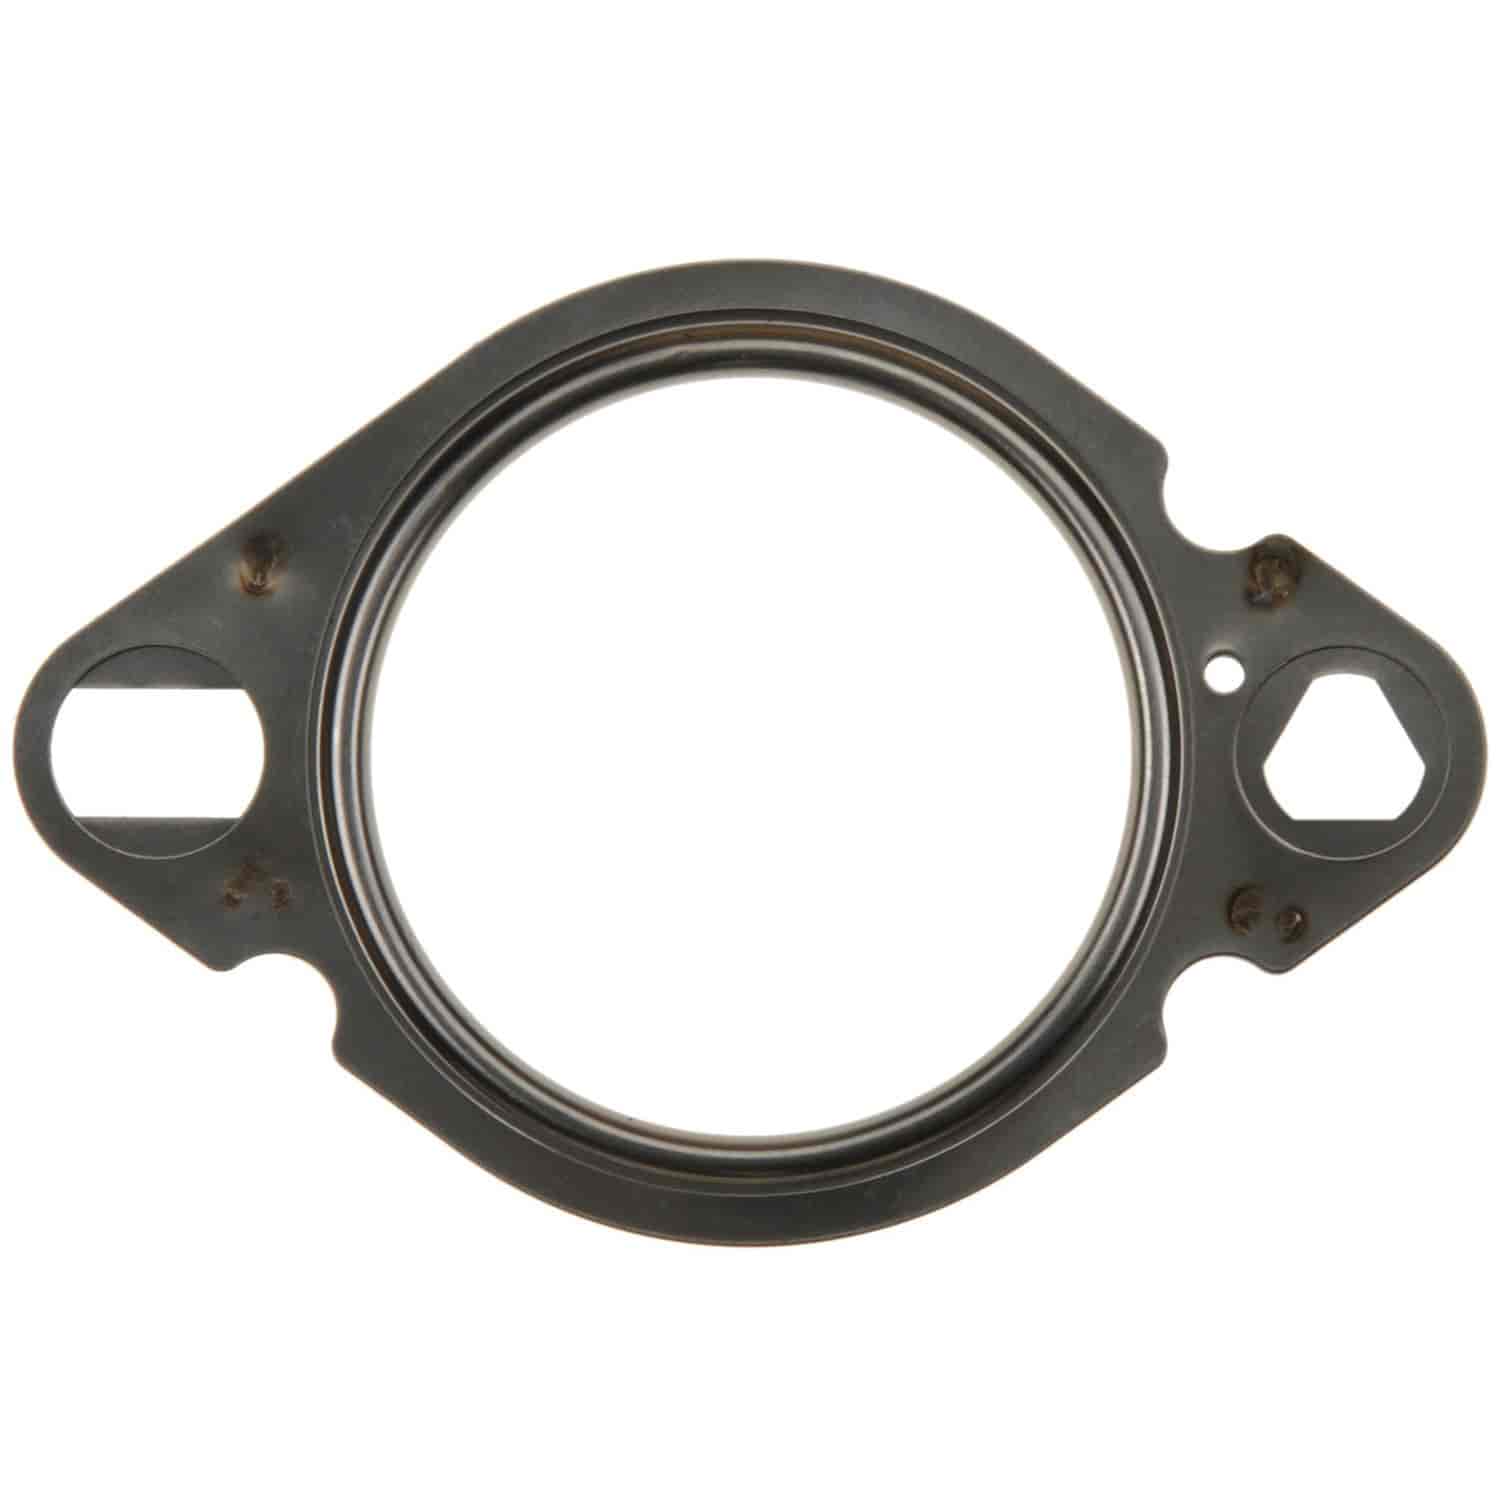 Exhaust Pipe Gasket GMC 3.6L High Feature Vins 7 & V 2008-2009 Cadillac CTS